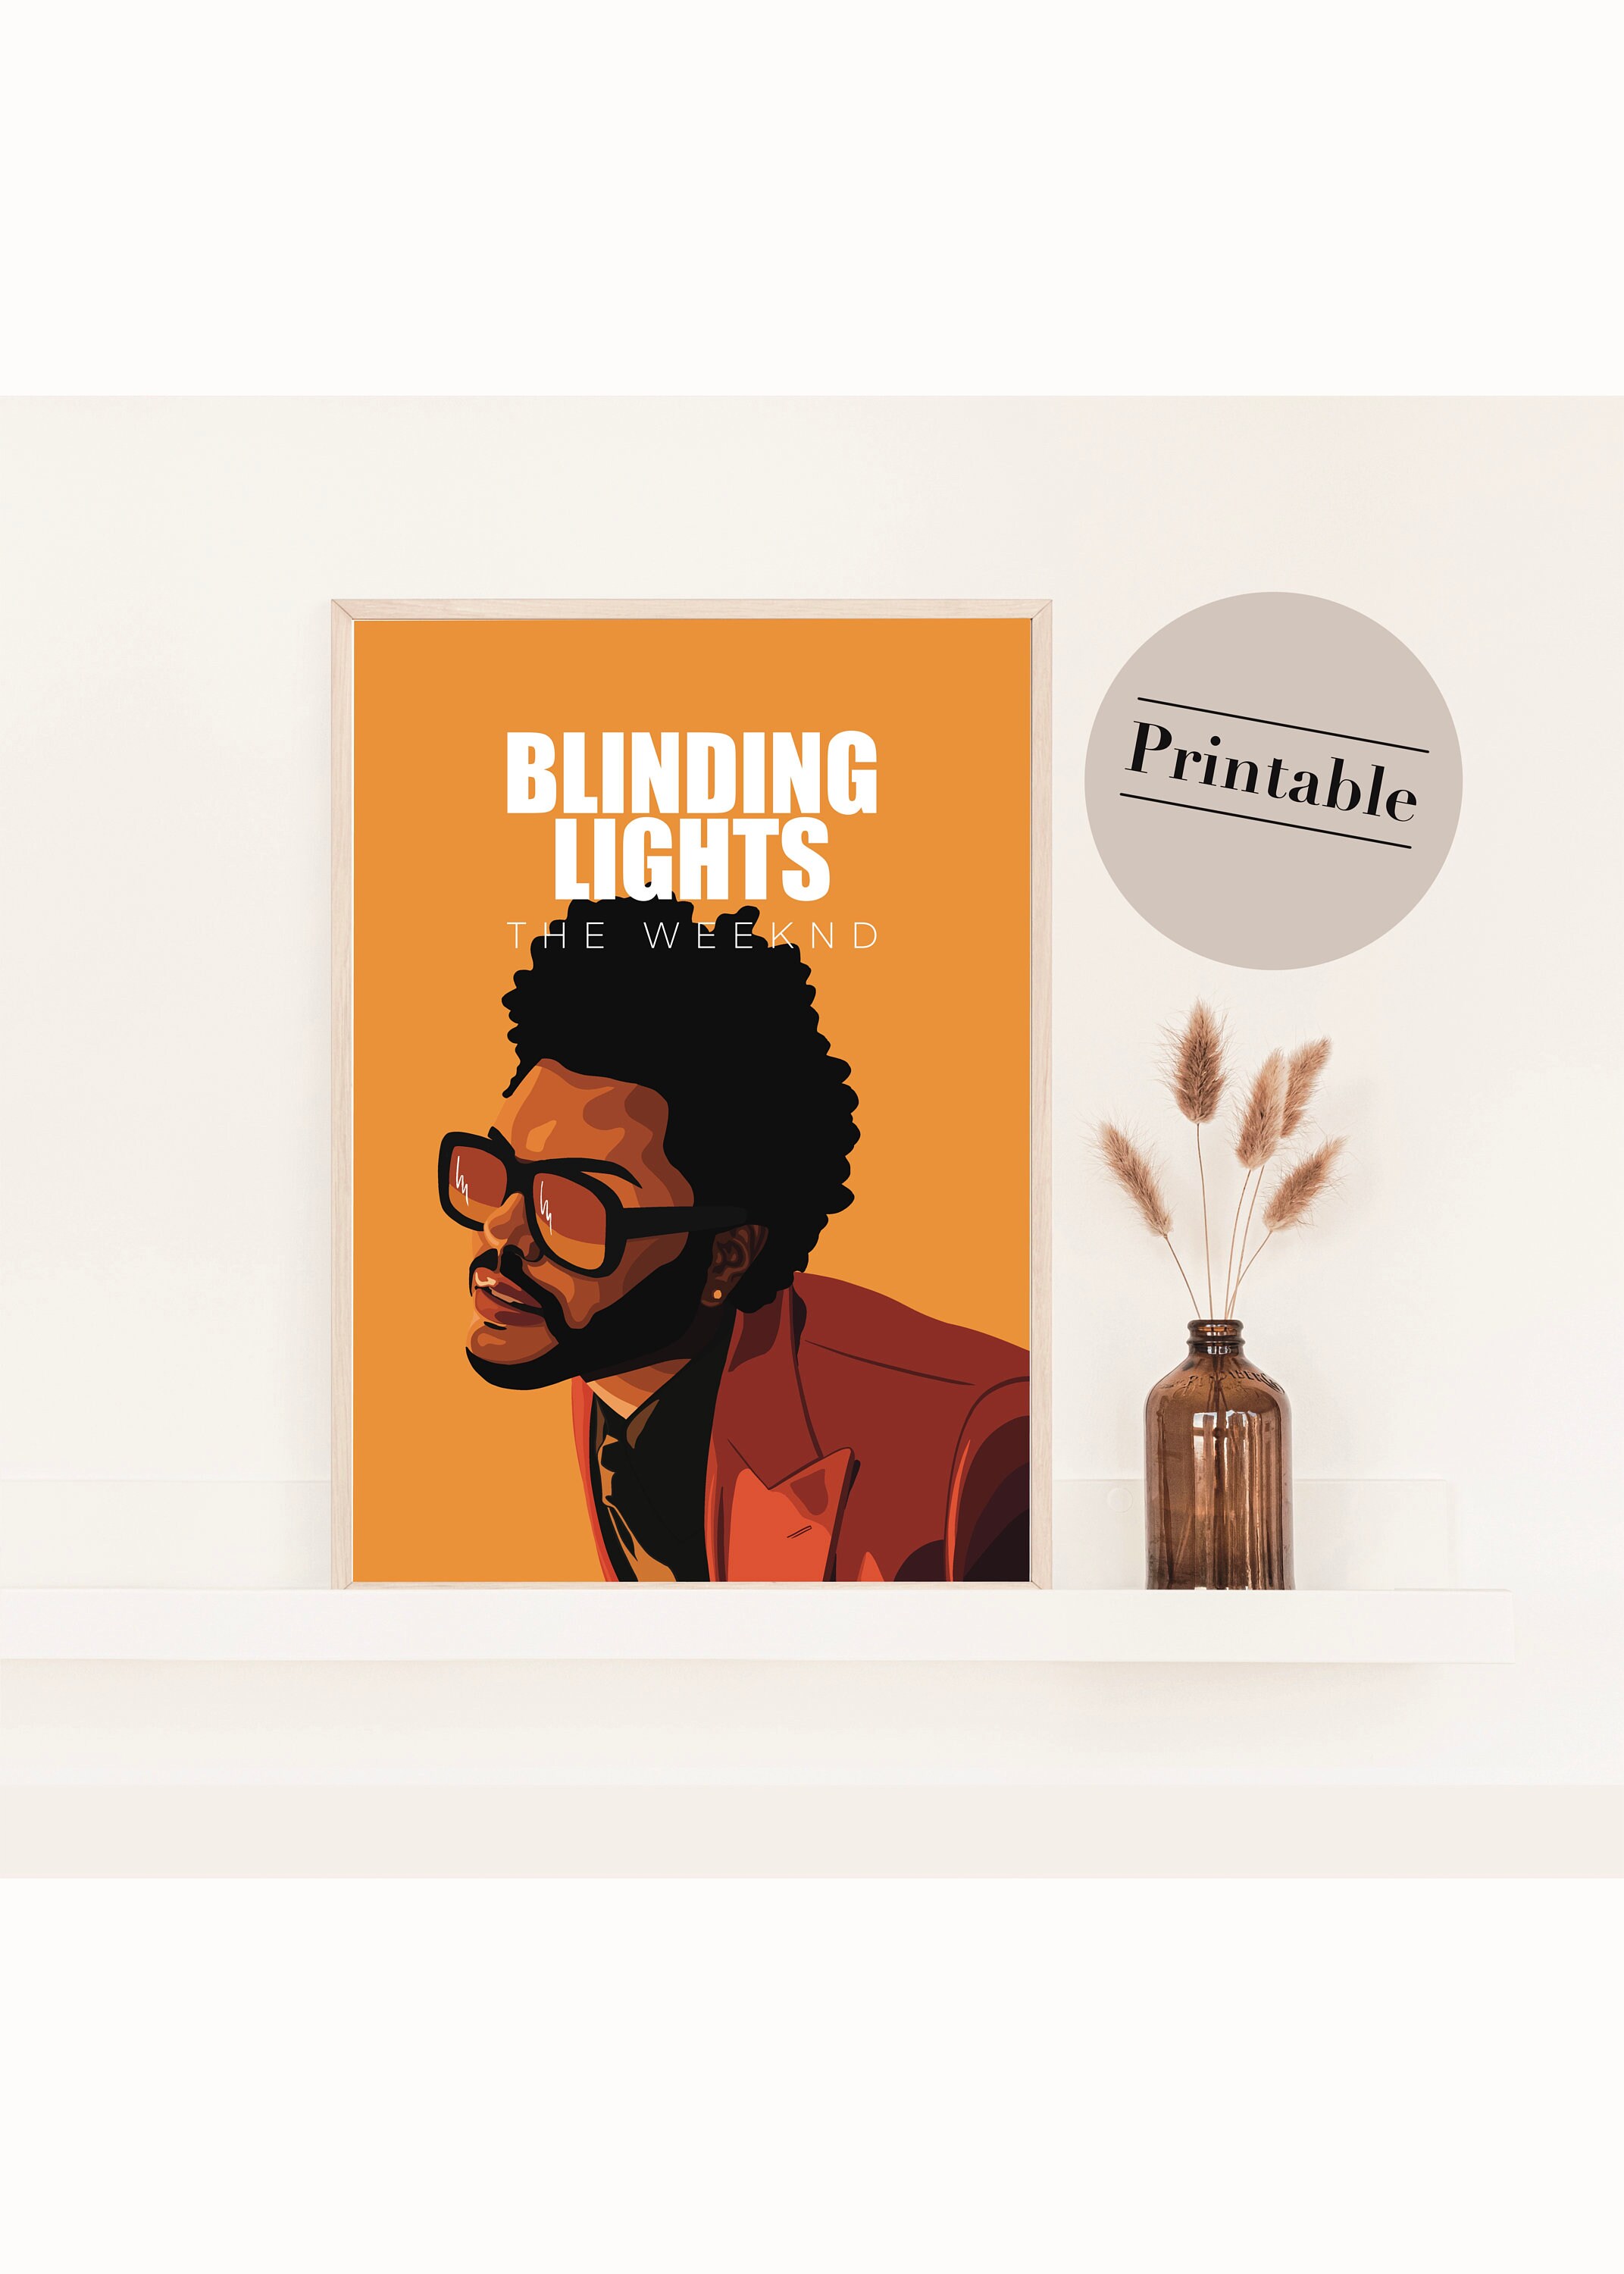 the-weeknd-poster-with-text-merch-blinding-lights-poster-etsy